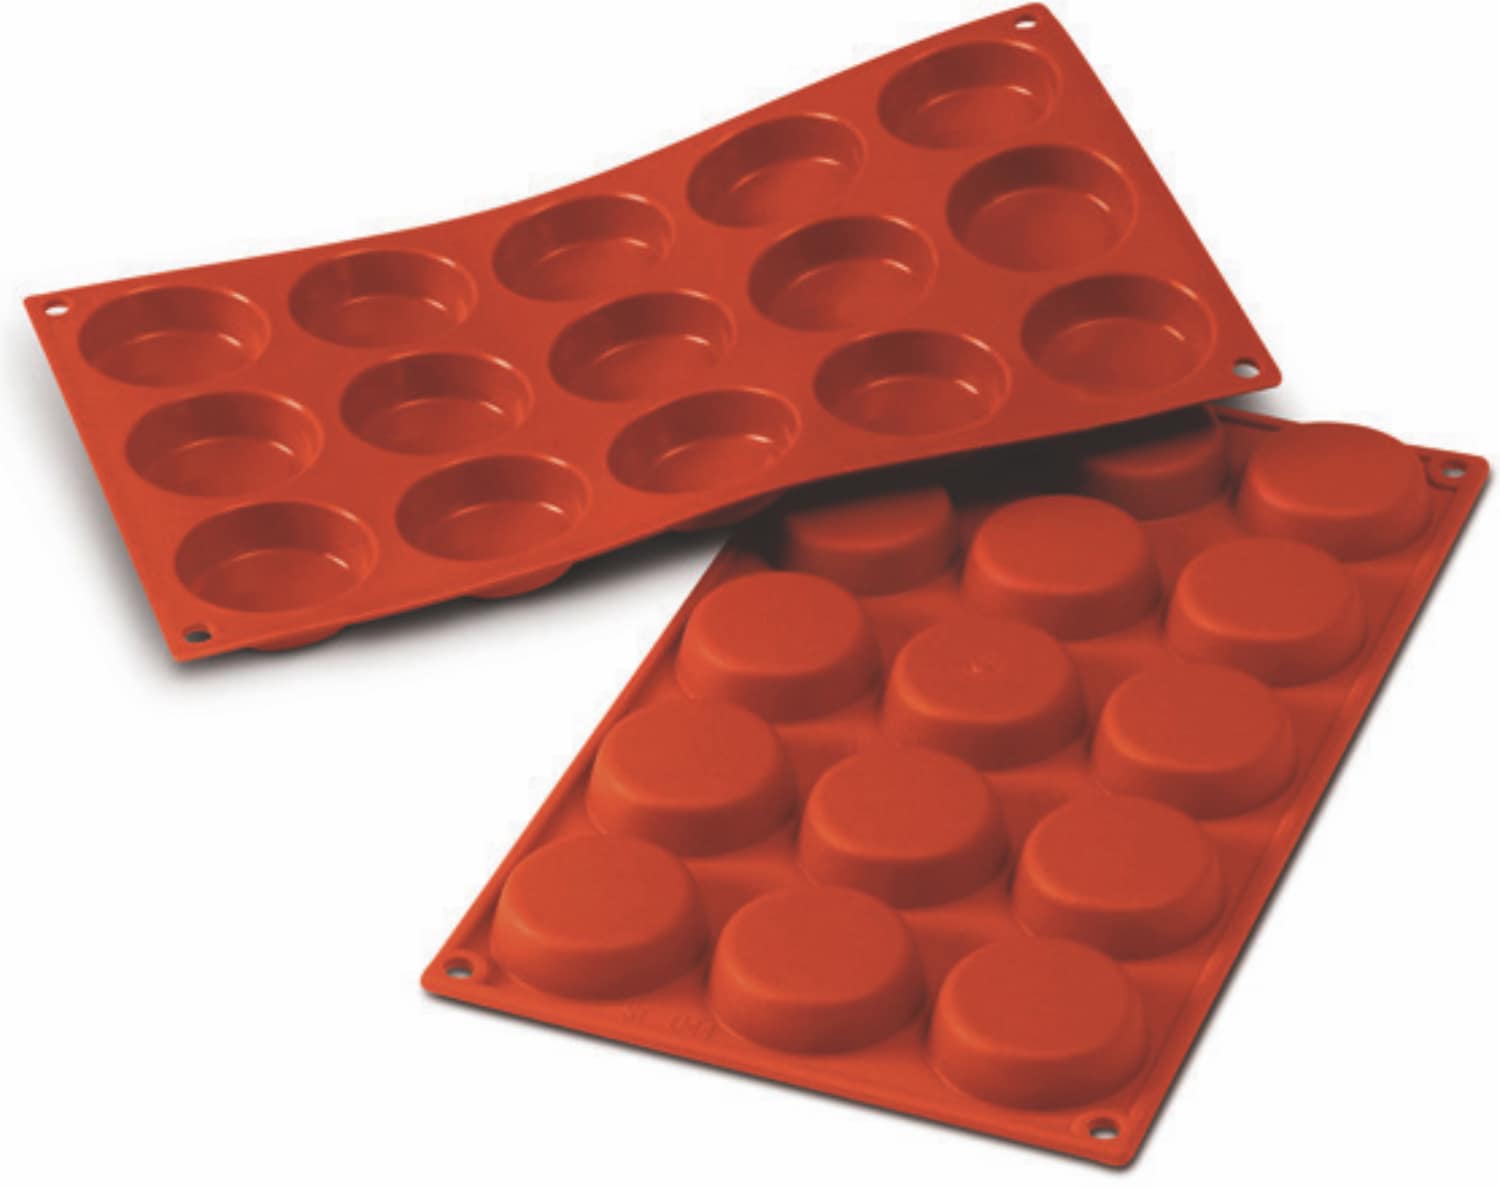 Silicone baking moulds "Flan" 300 x 175 mm 115223